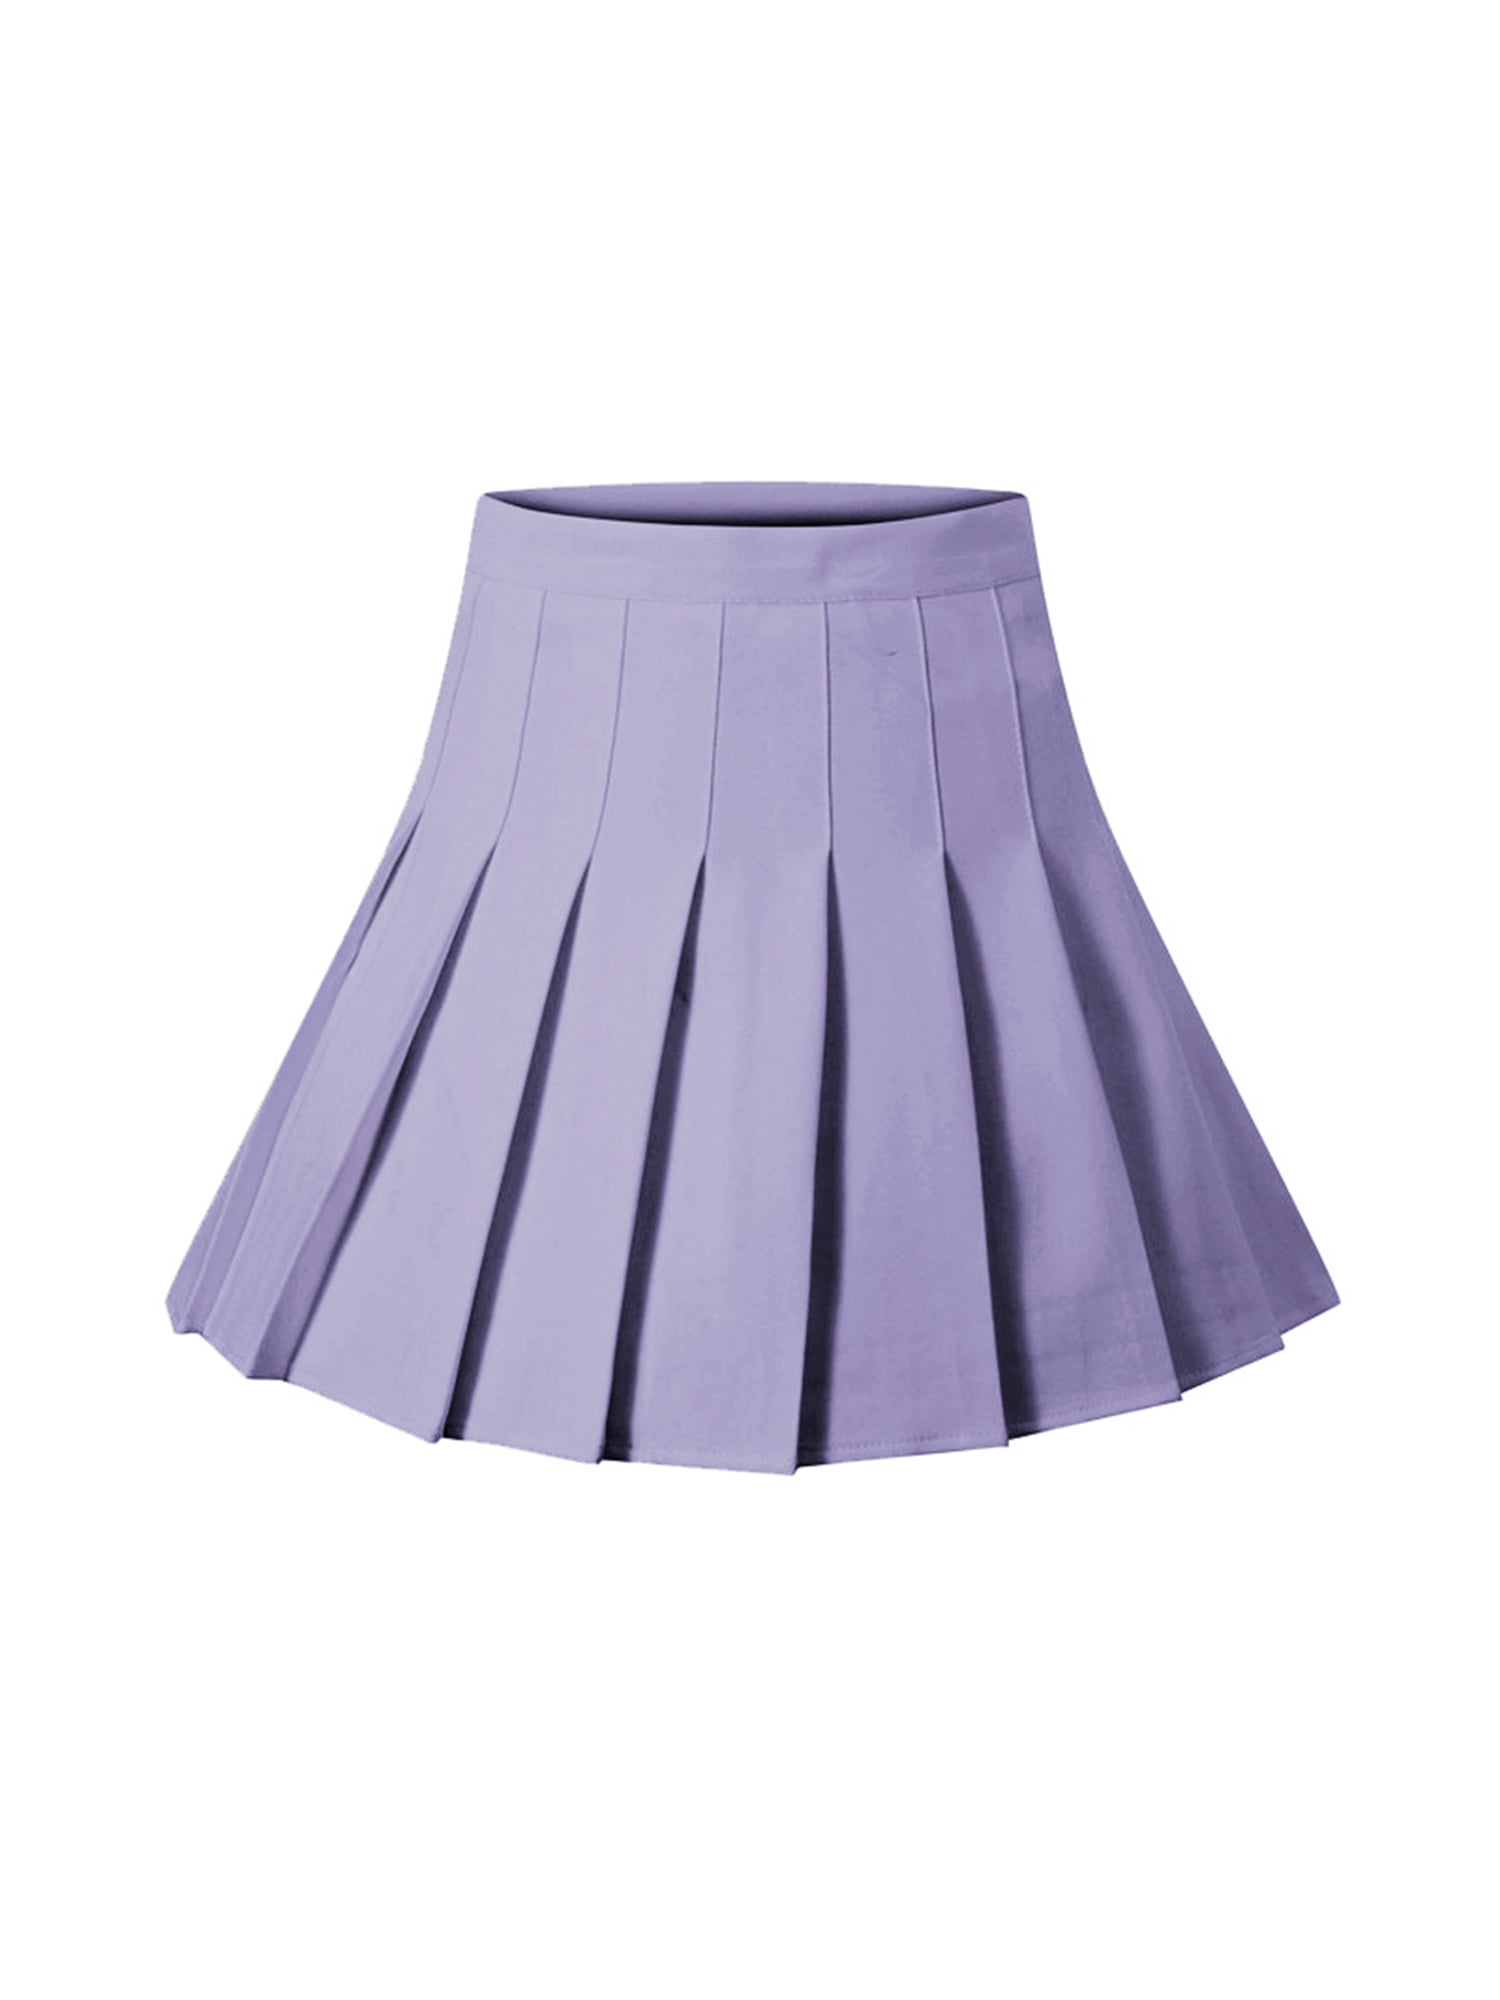 Beautifulfashionlife Girl`s Short Pleated School Dresses for Teen Girls Tennis Scooters Skirts 